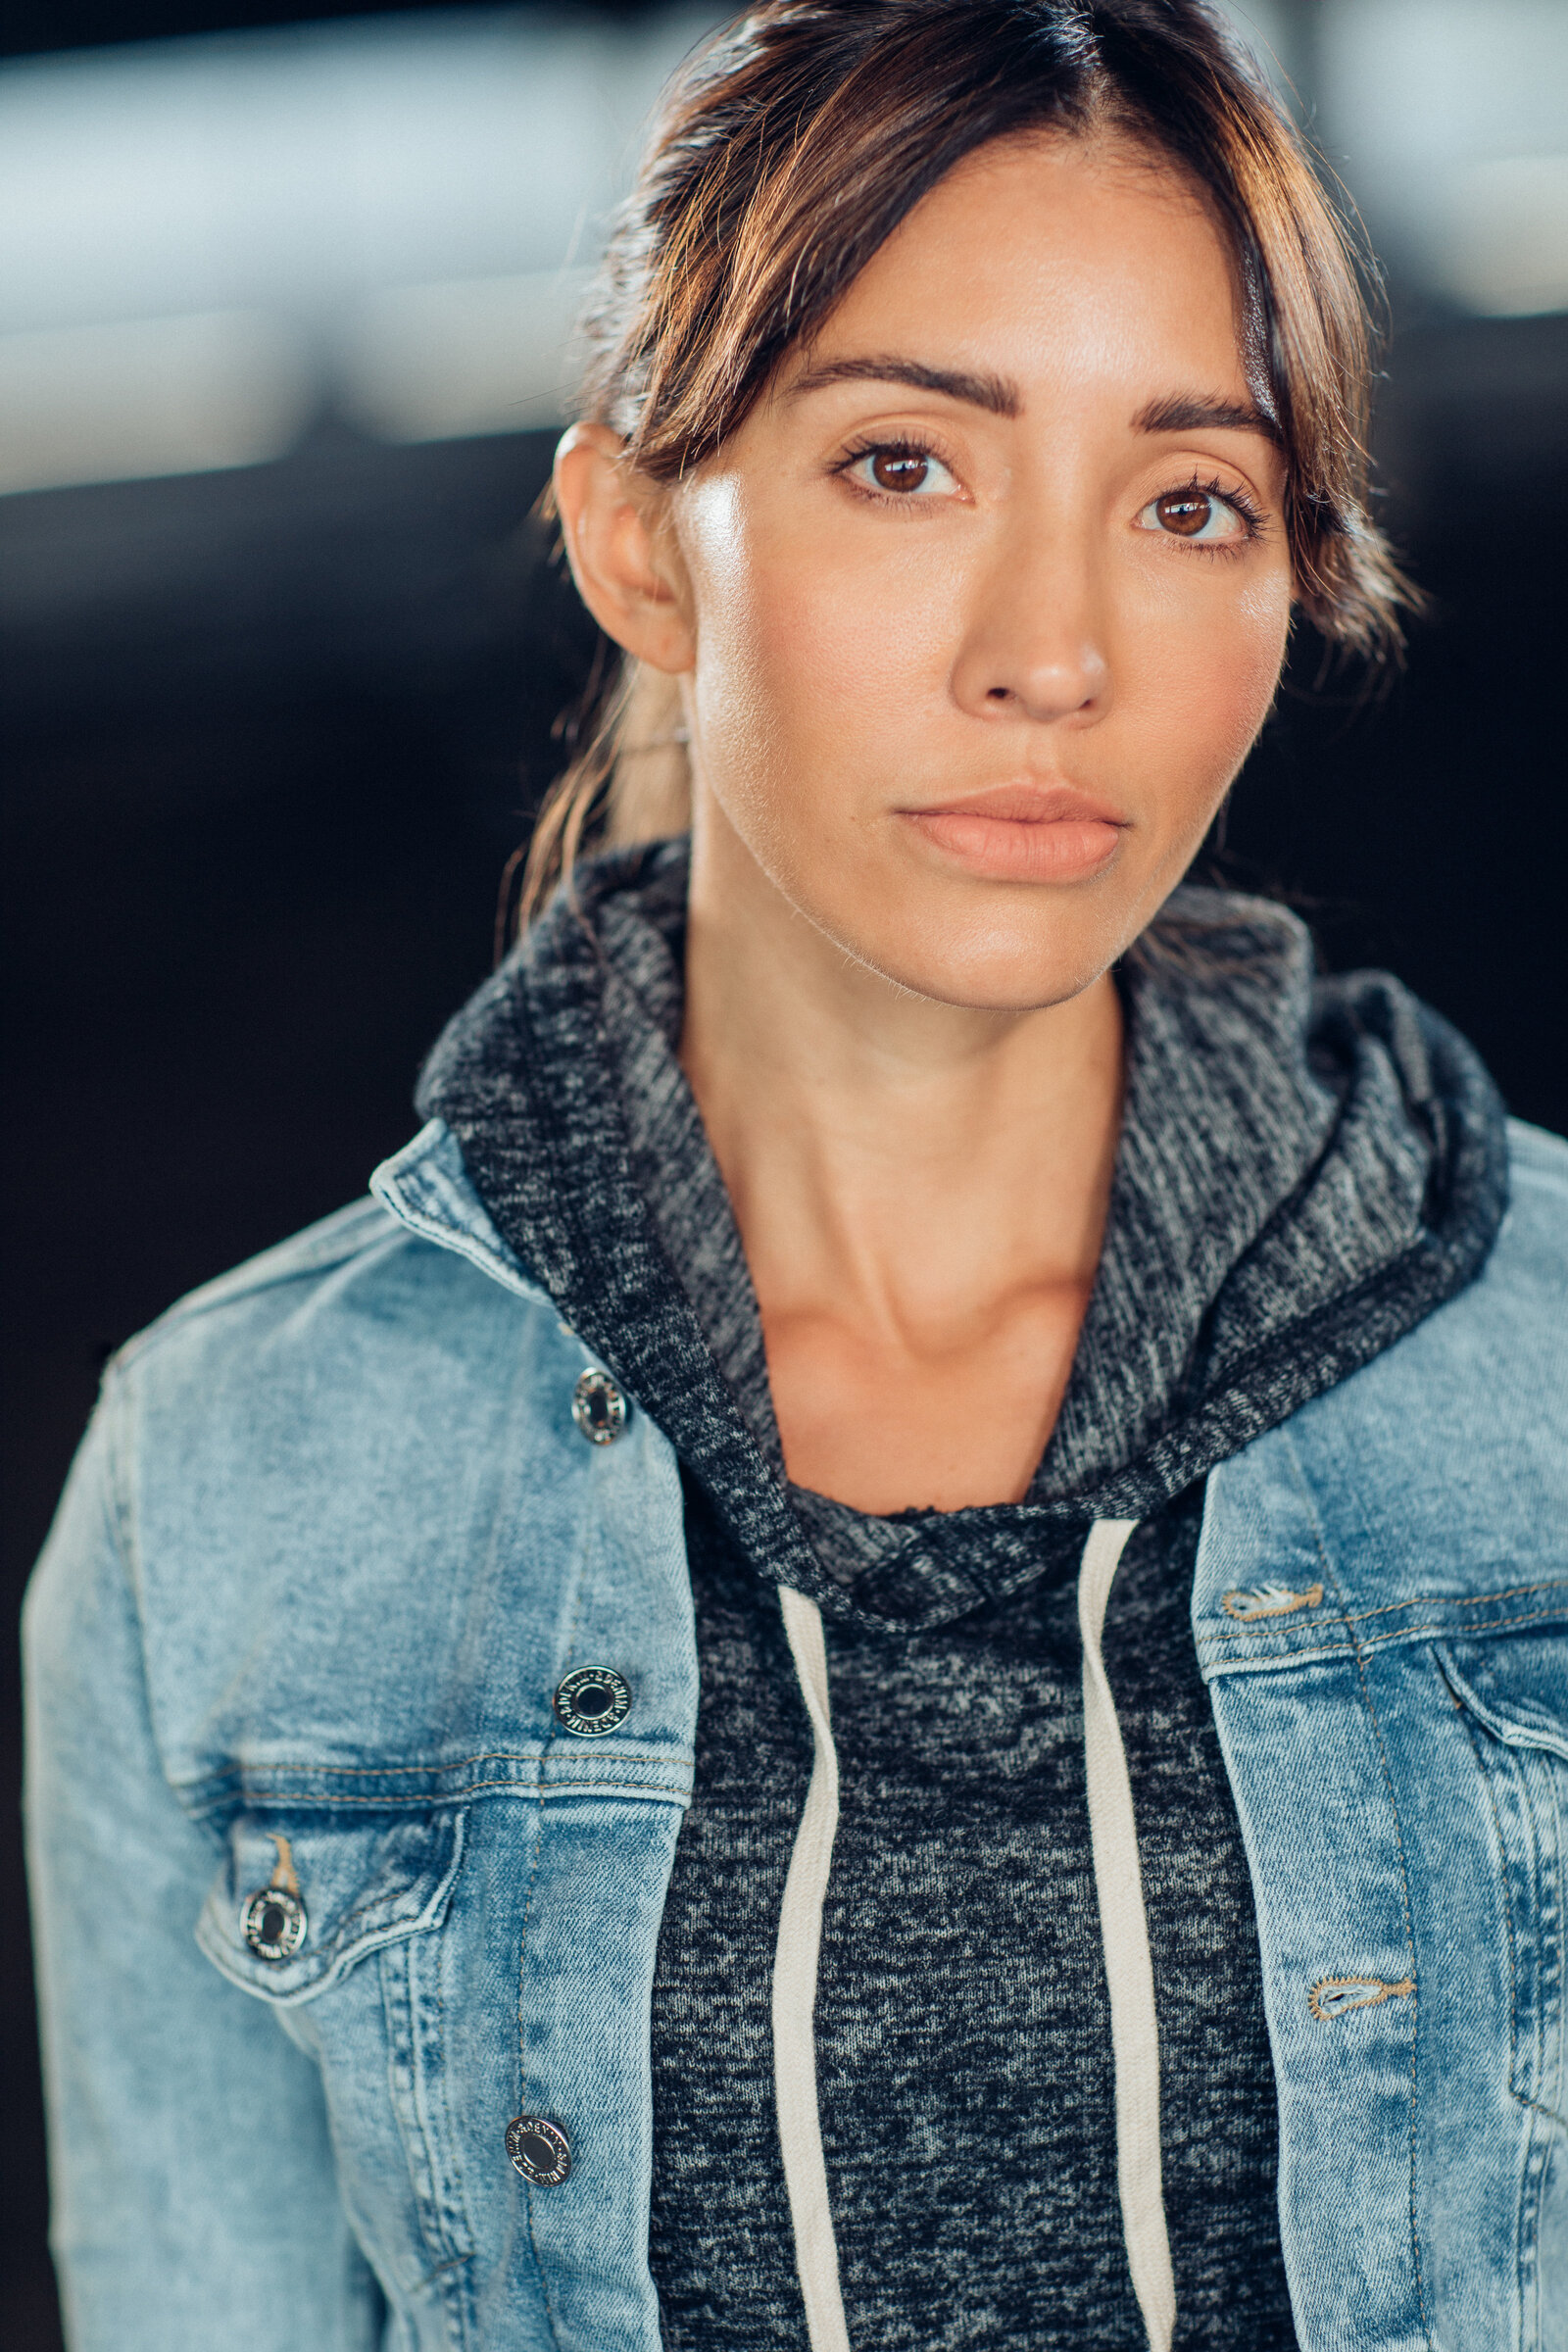 Headshot Photograph Of Young Woman In Blue Denim Jacket And Black Hoodie Los Angeles